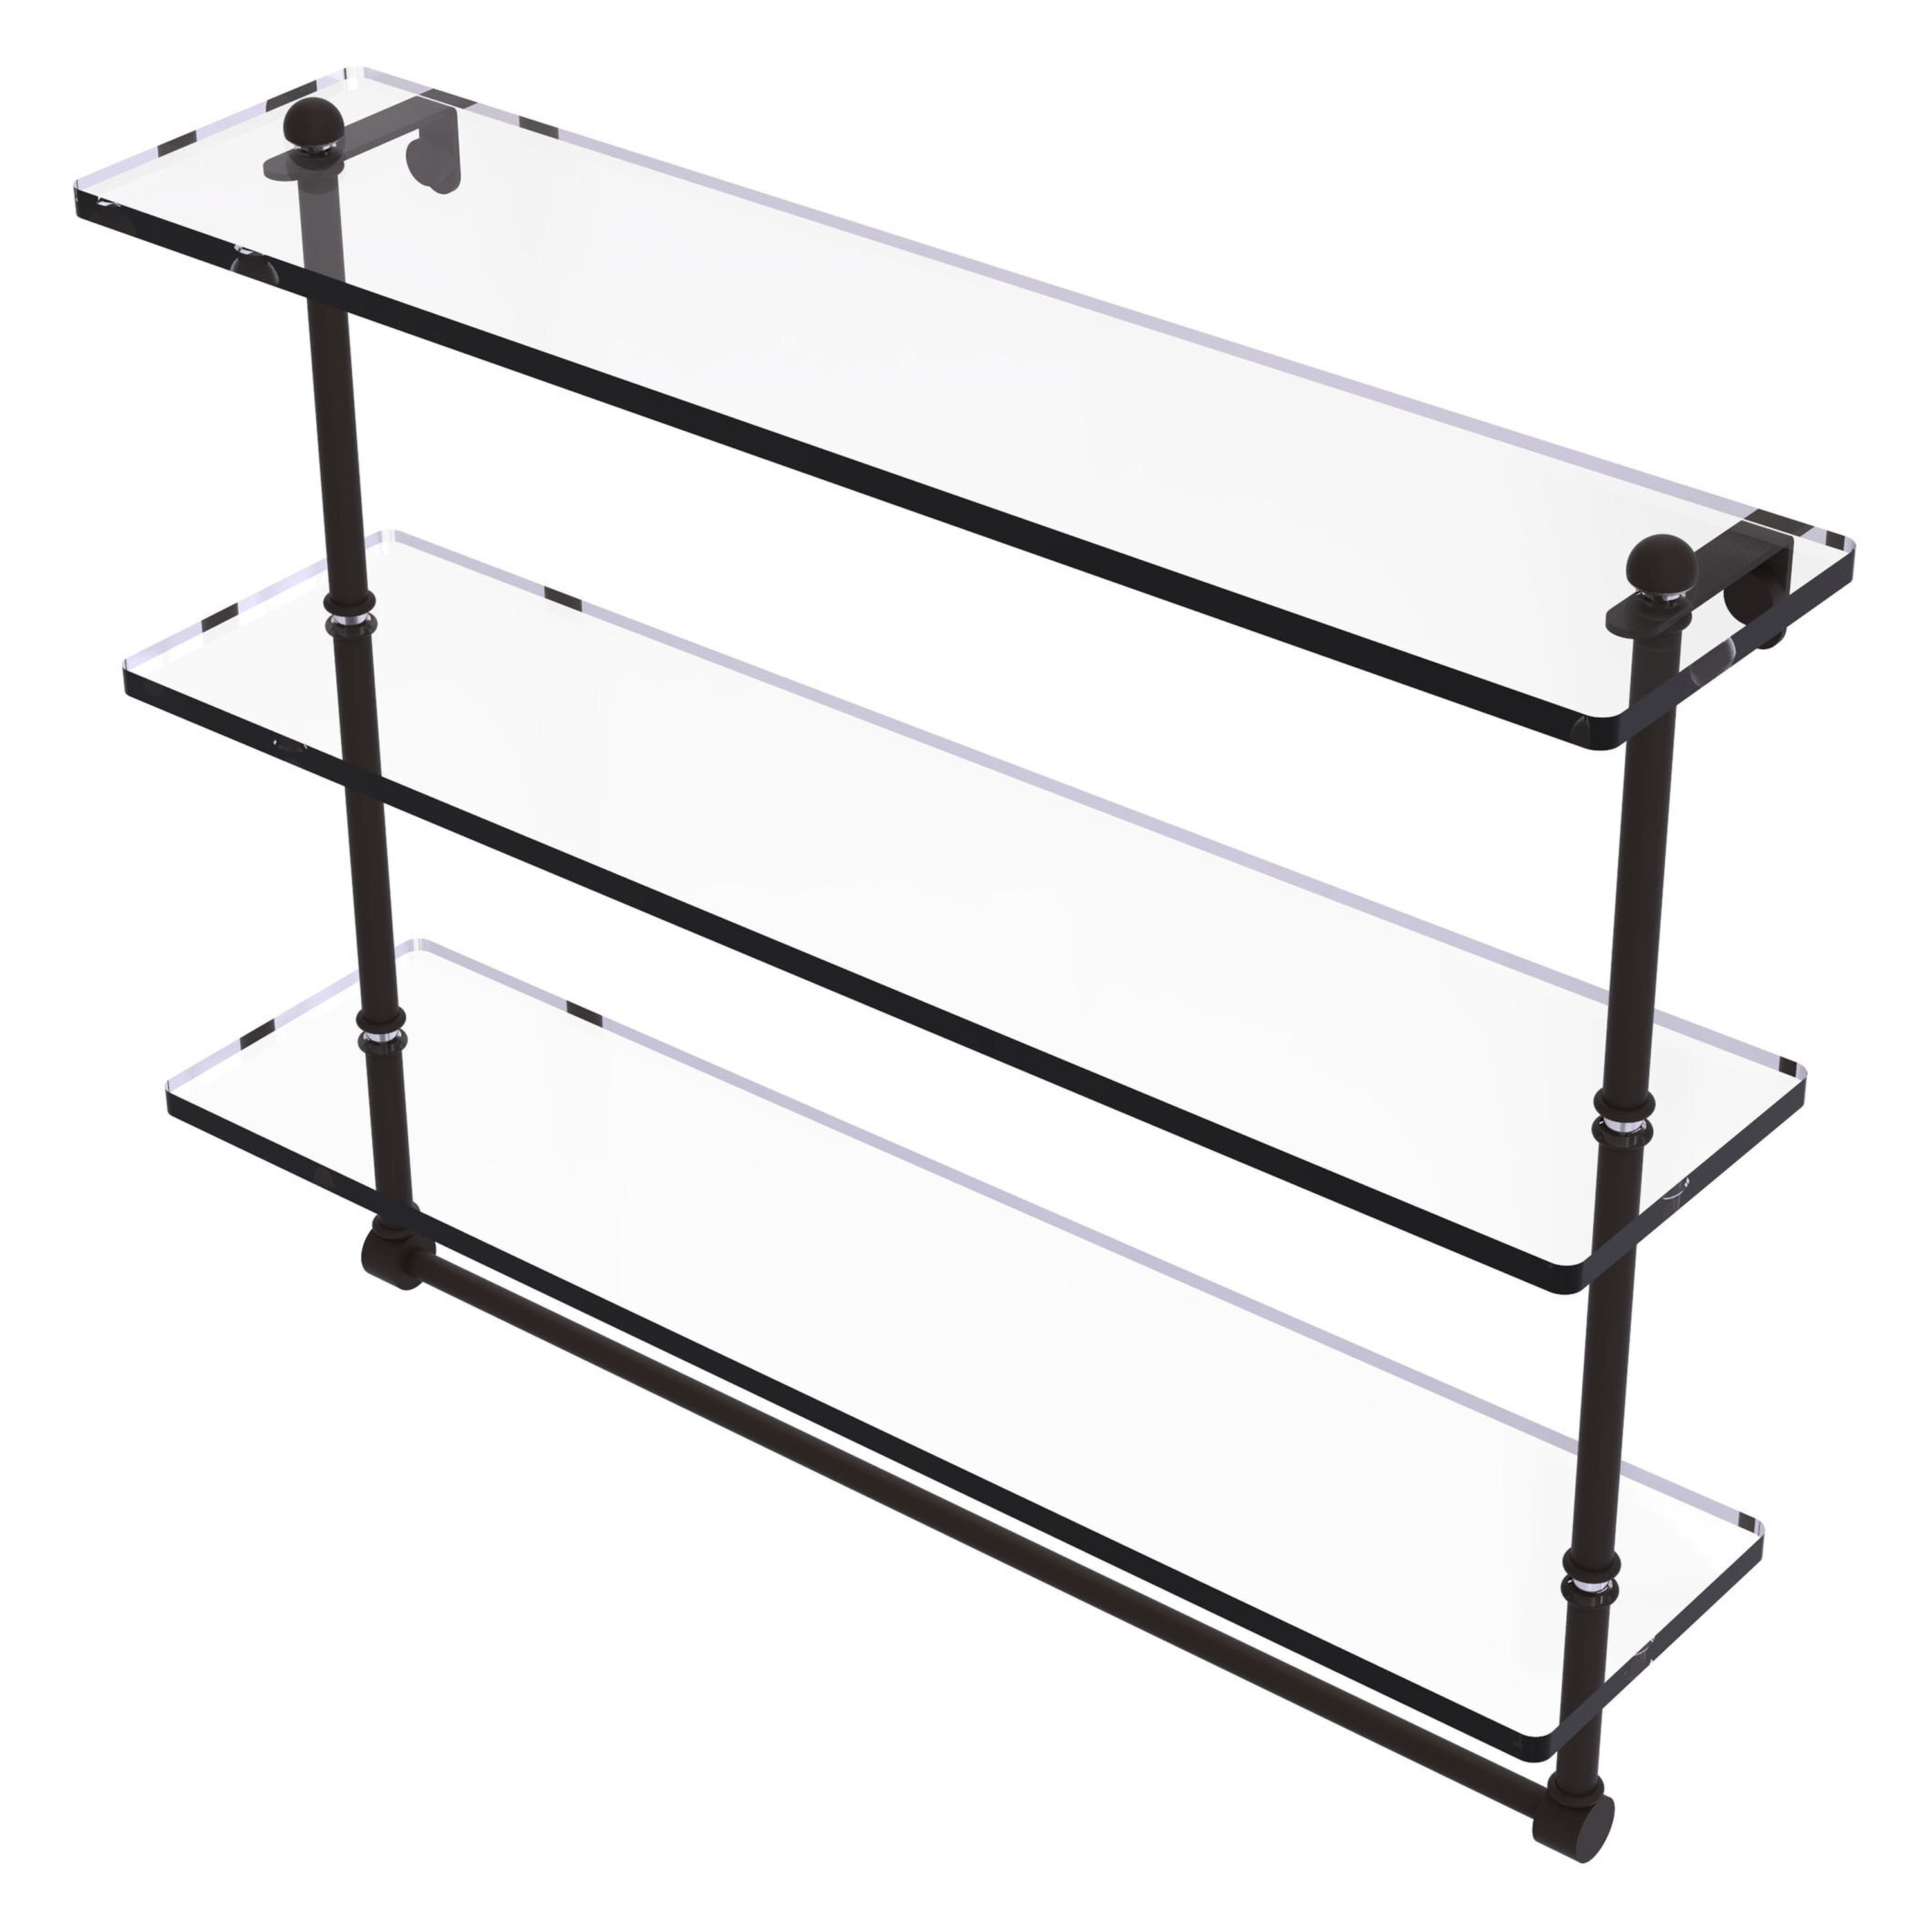 BESy Heavy Duty Lavatory Glass Bathroom Shelf, 2 Tier Tempered Glass Shower  Shelves with Towel Bar Wall Mounted, Shower Storage 15 by 5 inches, Matte